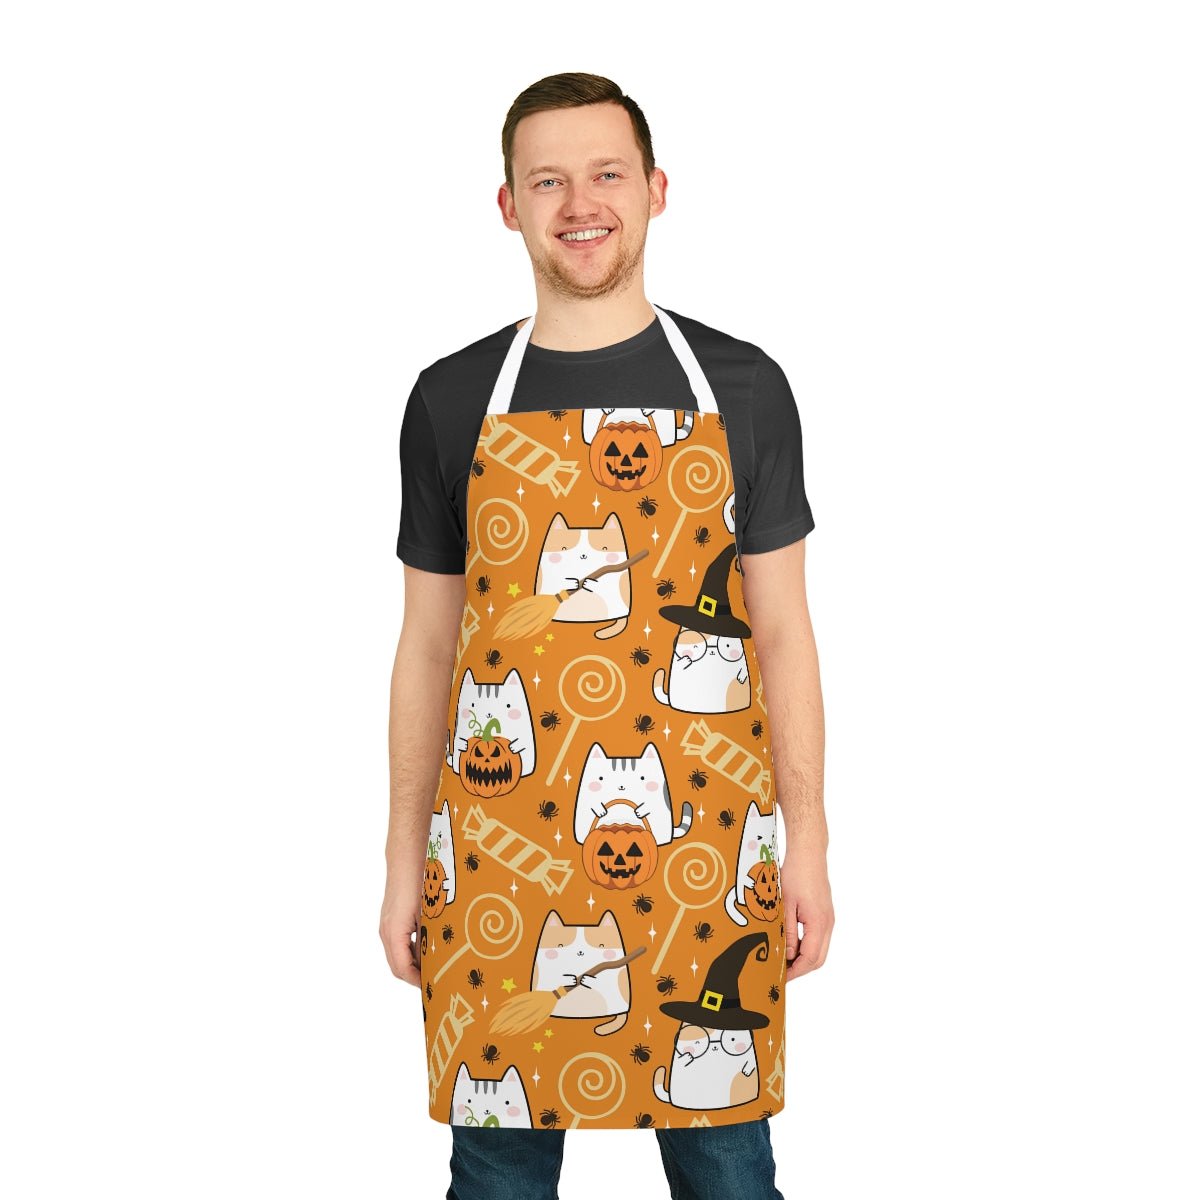 Halloween Kawaii Cats and Candies Apron - Puffin Lime